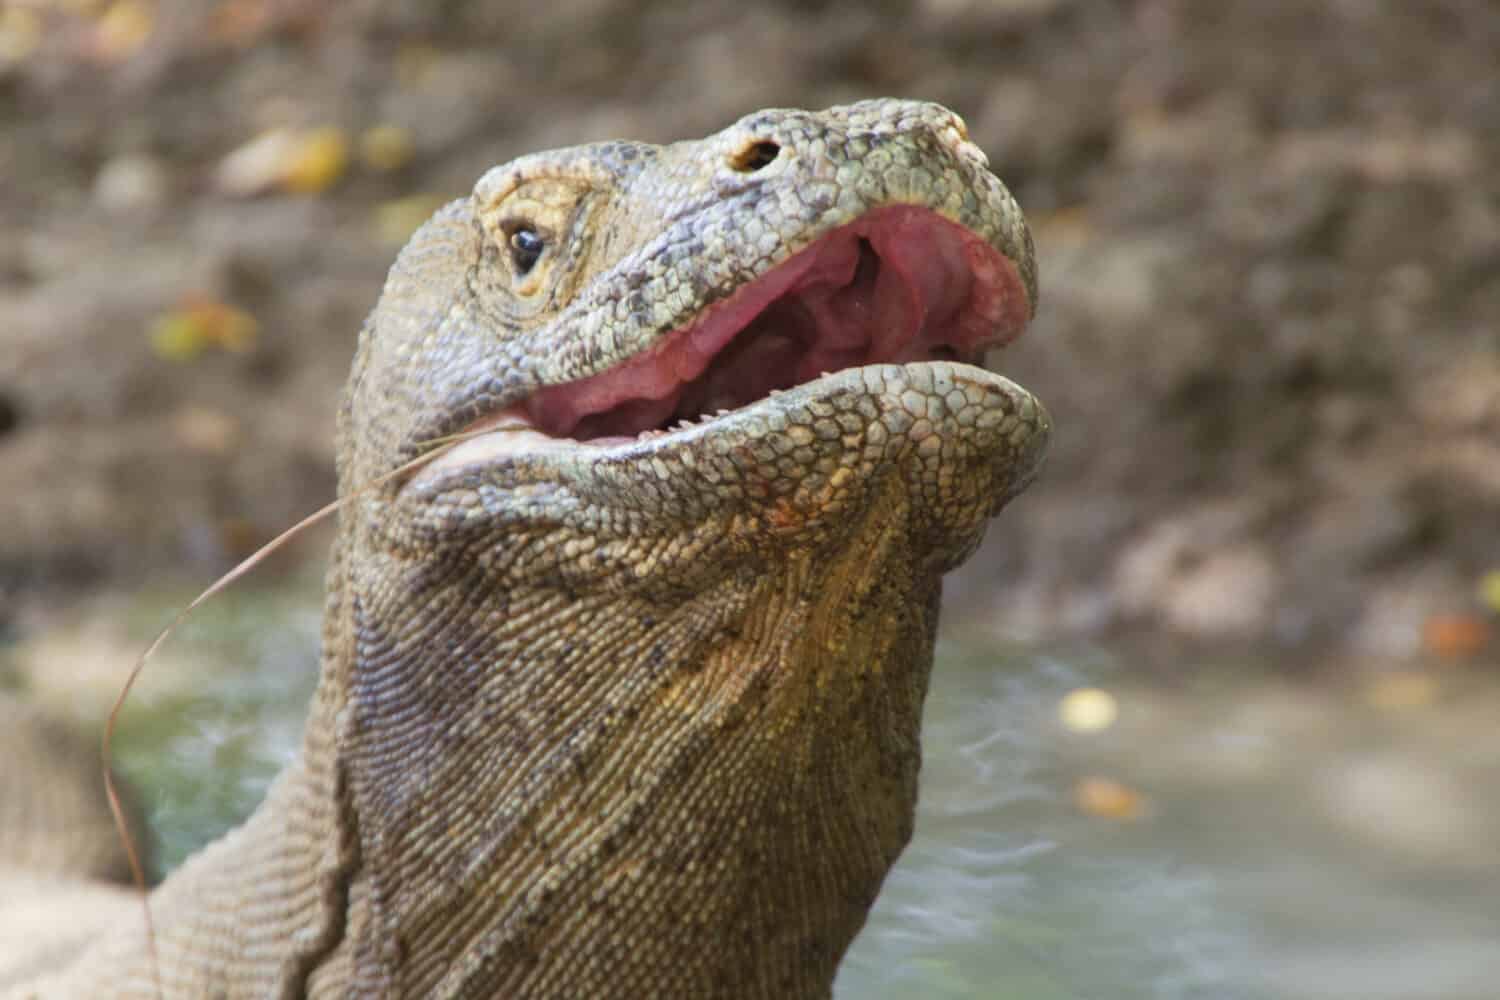 Komodo dragon biggest lizard on earth holding up its reptile head. The closeup with teeth in open predator mouth with nostrils above, Nusa Tenggara, Flores Indonesia